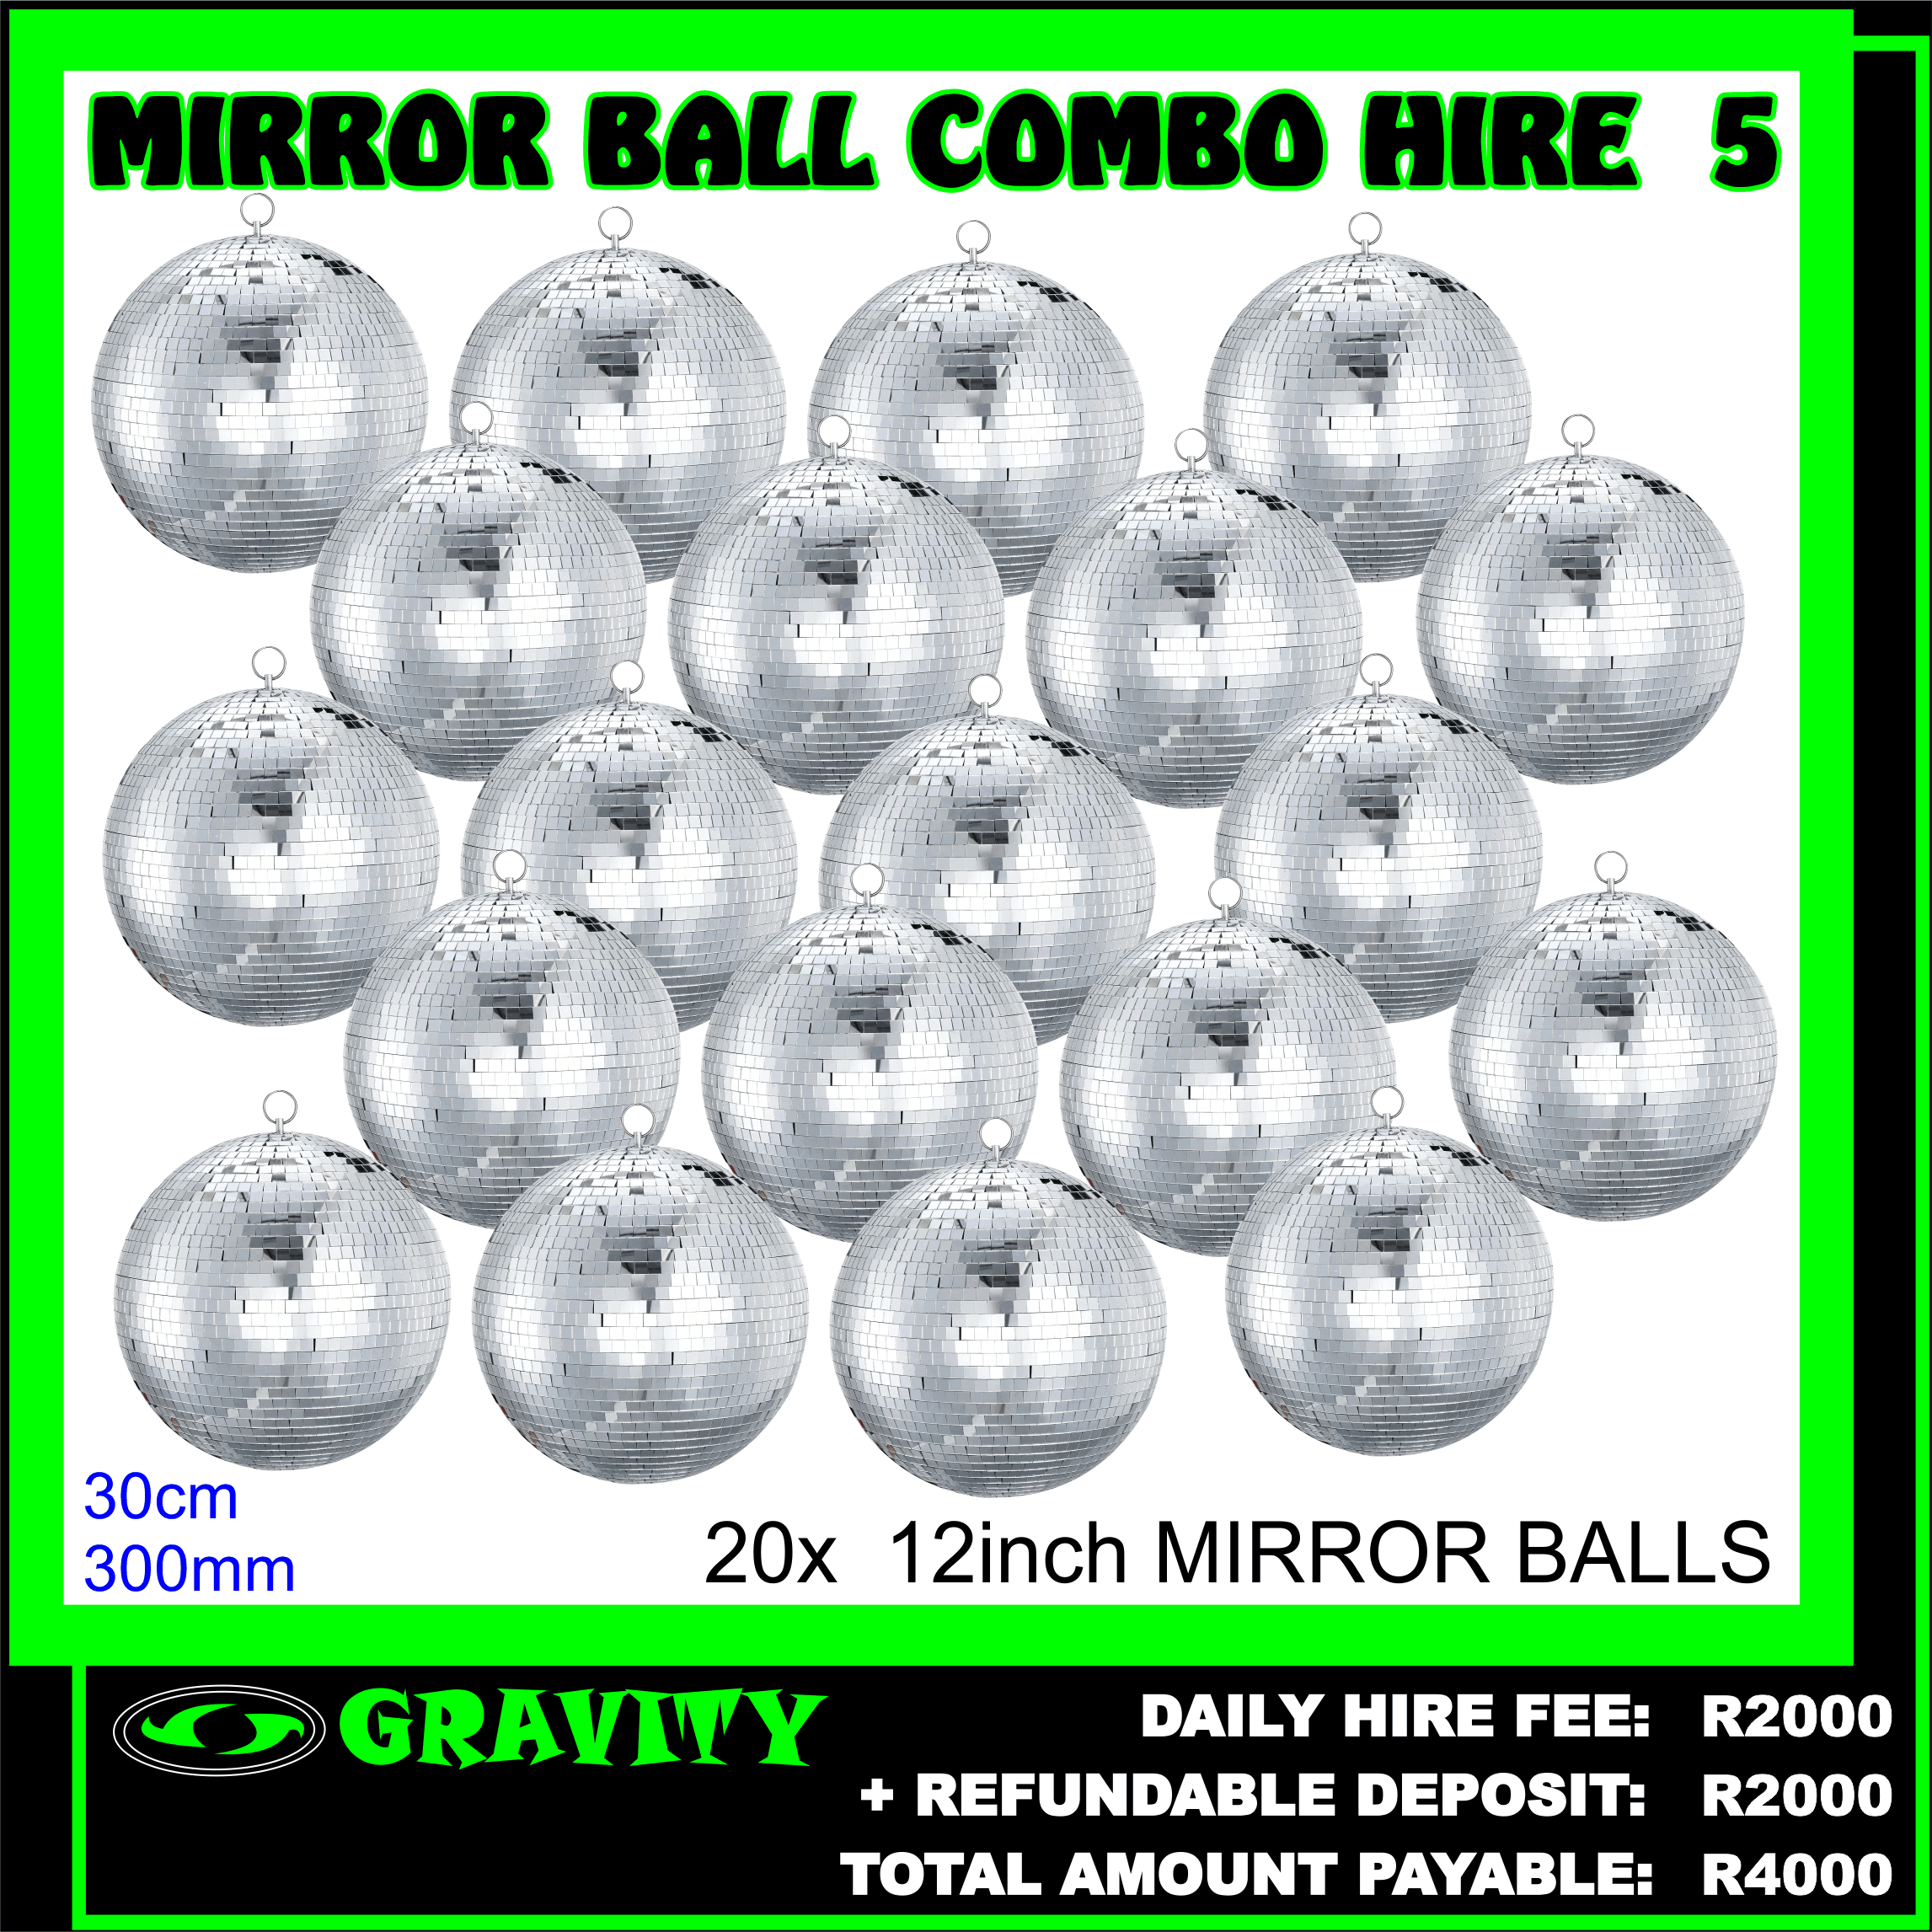 *Total daily hire combo fee is payable upfront (includes deposit)       mirror balls - Prodecor Function Decorators - Show Category MIRROR BALL HIRE DURBAN , 80s THEME PARTY MIRROR BALL HIRE DURBAN .  Home Disco Effects Hire For Party or Event - Joy Jukes  Mirror Ball Hire | Mirror Ball, Motor, Pin Spot and Stand ...https://cal-x.co.za › product › mirror-ball-hire Mirror ball hire from CAL-X Rentals. The mirror ball is a classic lighting accessory. Our rental kit includes everything you need. It comes with a 30cm mirror ...     STRICTLY CASH ONLY (NO CARDS PAYMENTS)  *I acknowledge the price given to me is a per day charge rate.   *Equipment is hired & picked up from Gravity Store on the specific day of use.  *Equipment must to be returned the following day  by latest 12pm .  * If goods are not returned a further daily hiring fee will be charged ( for every late day).   *Refundable deposit will be deducted for any damages to equipment.    *Documents required:    > COPY OF ID or  DRIVERS LICENSE   (original SA id)  > PROOF OF RESIDENCE.  (not older than 3 months)   > CAR REGISTRATION NUMBER 